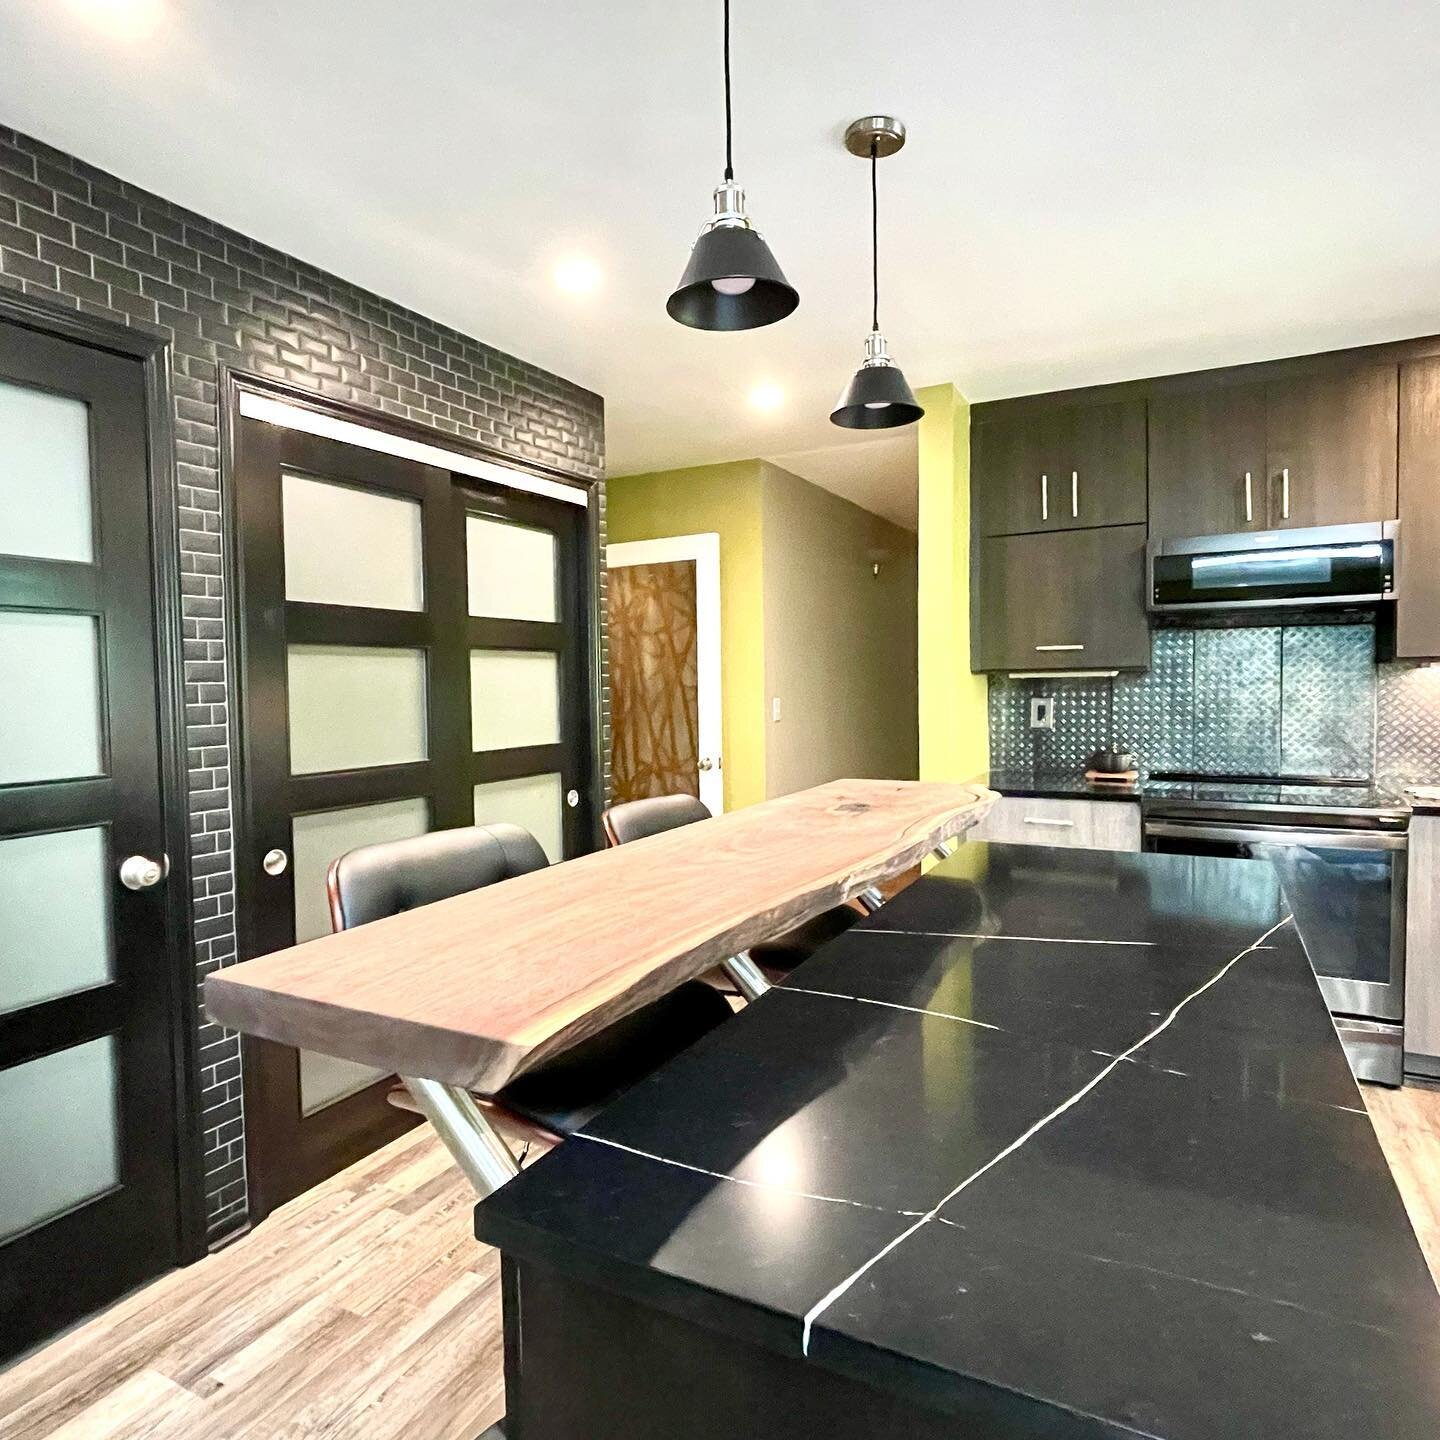 We wrapped up this kitchen a few weeks ago and have to hand it to these fun clients for going bold and with their material and color selections.  Our favorites are the black pantry doors with small black tile surround, black quartz countertop and gor